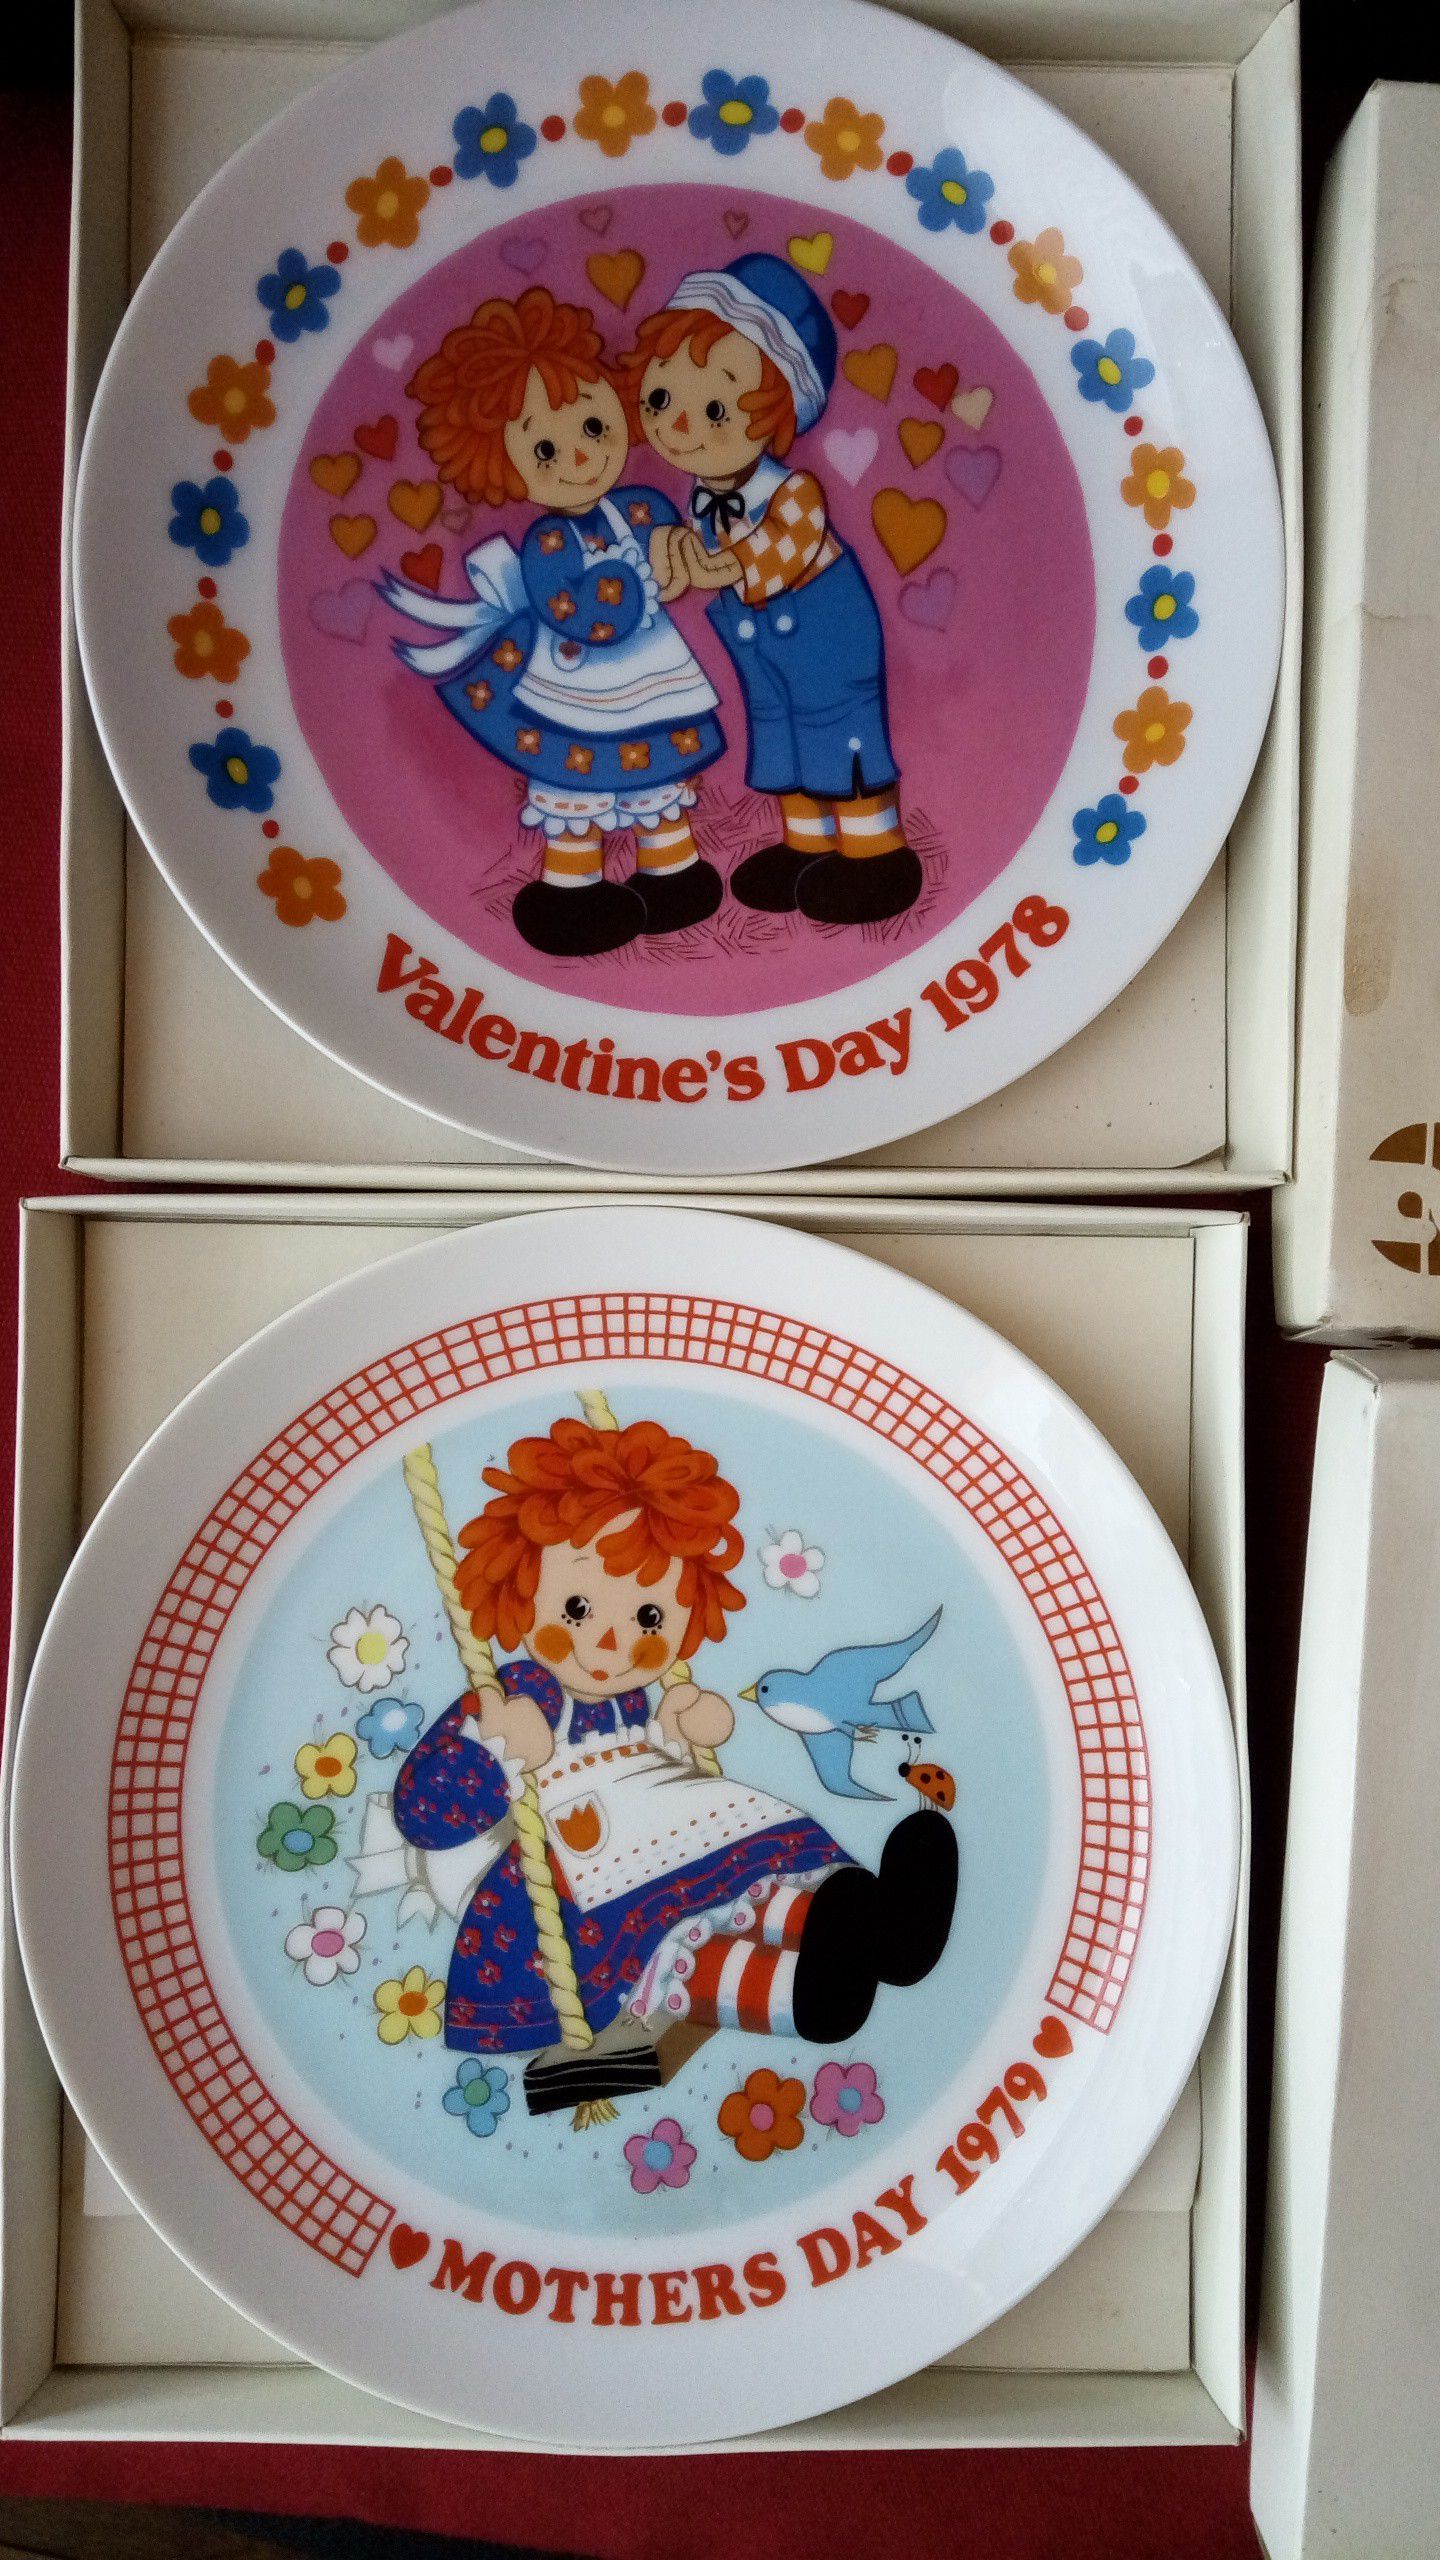 $15 BOTH. Raggedy Ann collection. 8" ceramic plates with boxes